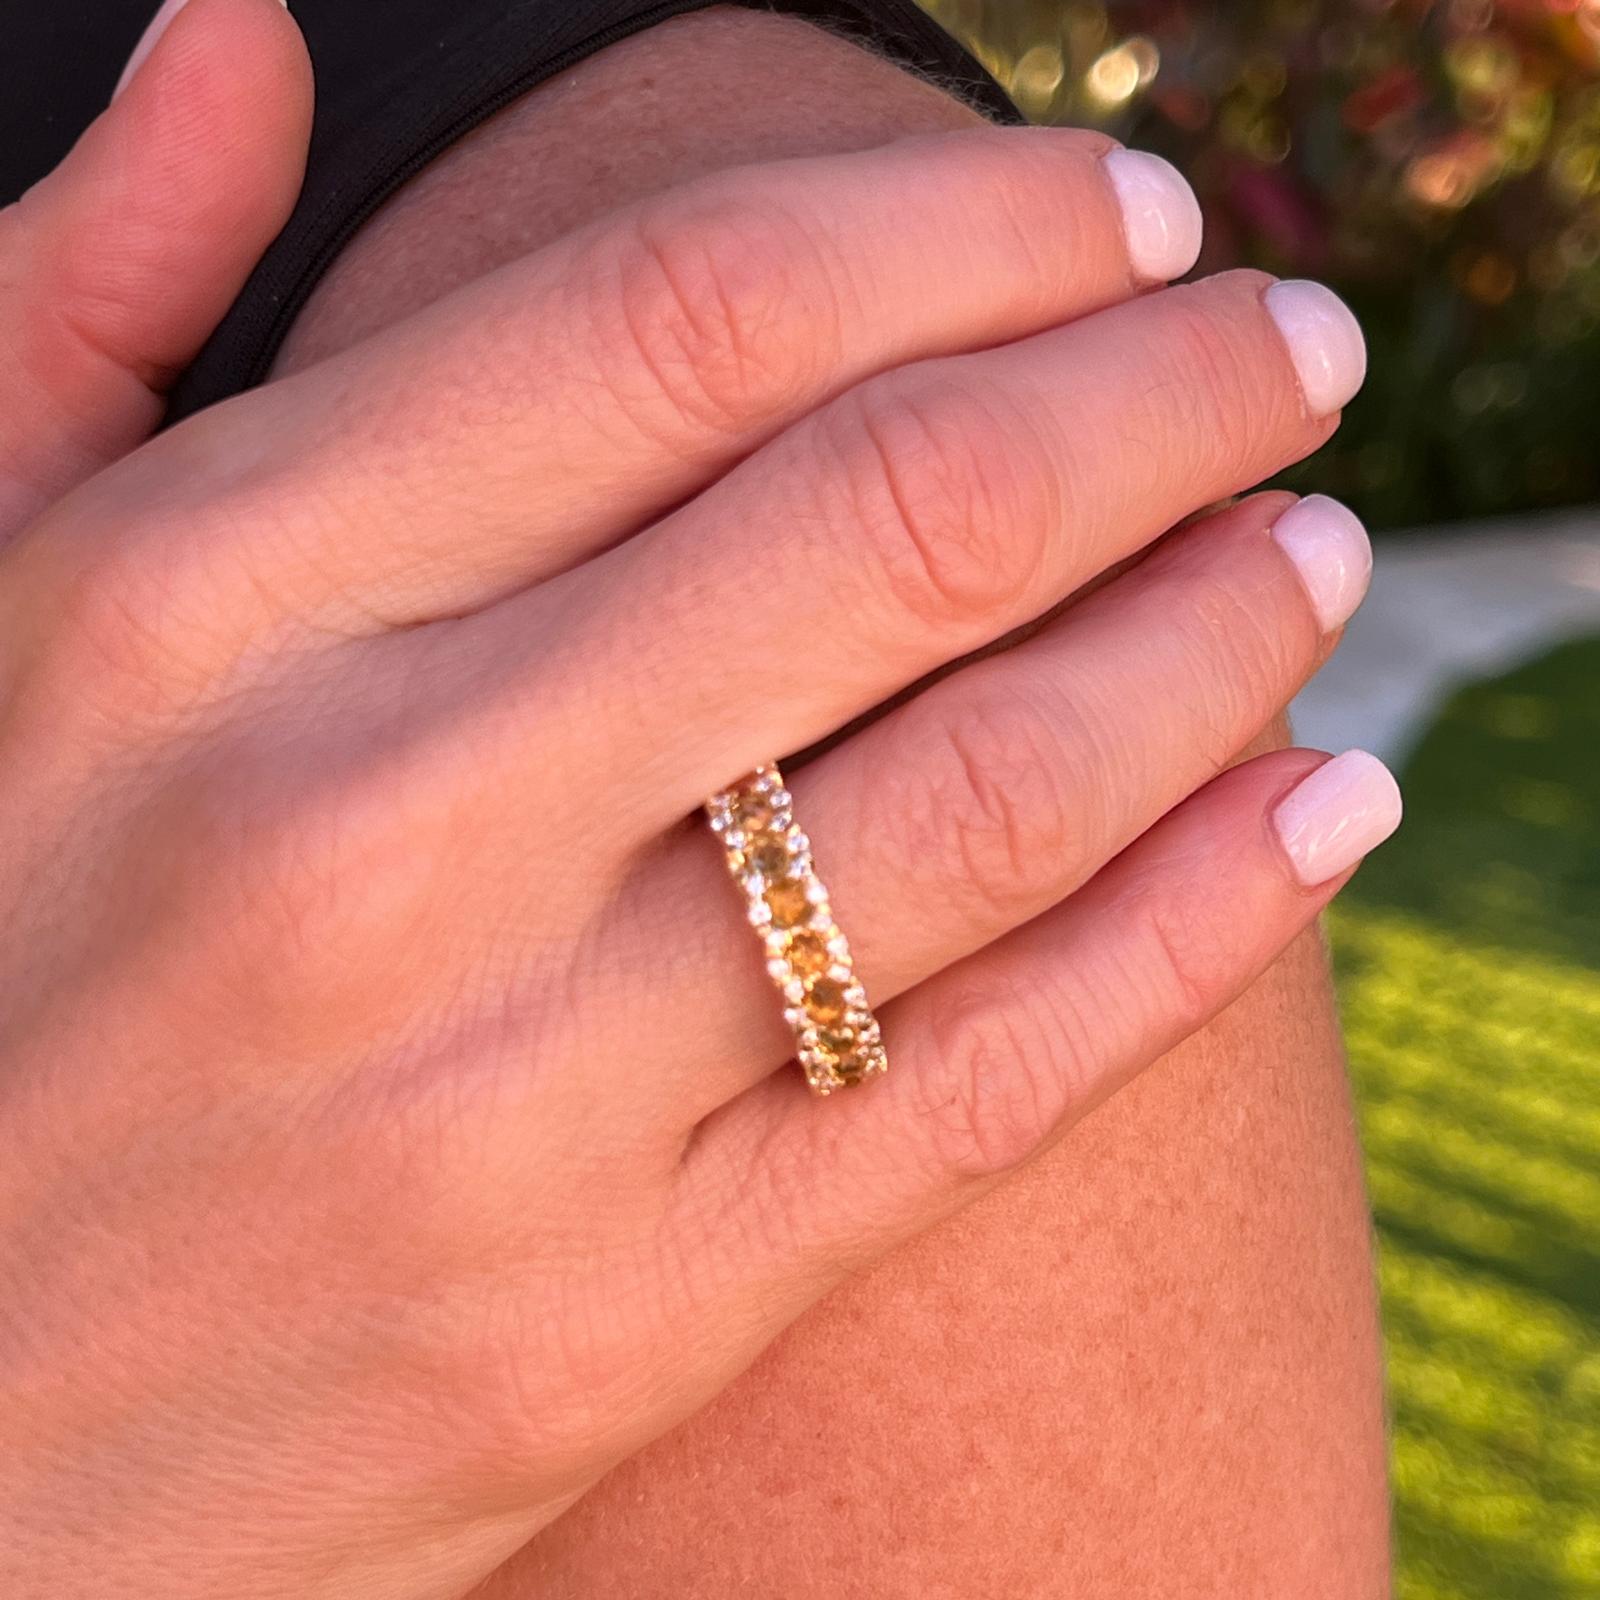 Gorgeous diamond and citrine eternity band crafted in 18 karat yellow gold. The band features round citrine gemstones and 80 round brilliant cut diamonds weighing approximately 1.04 CTW. The diamonds are graded G-H color and VS clarity. The ring